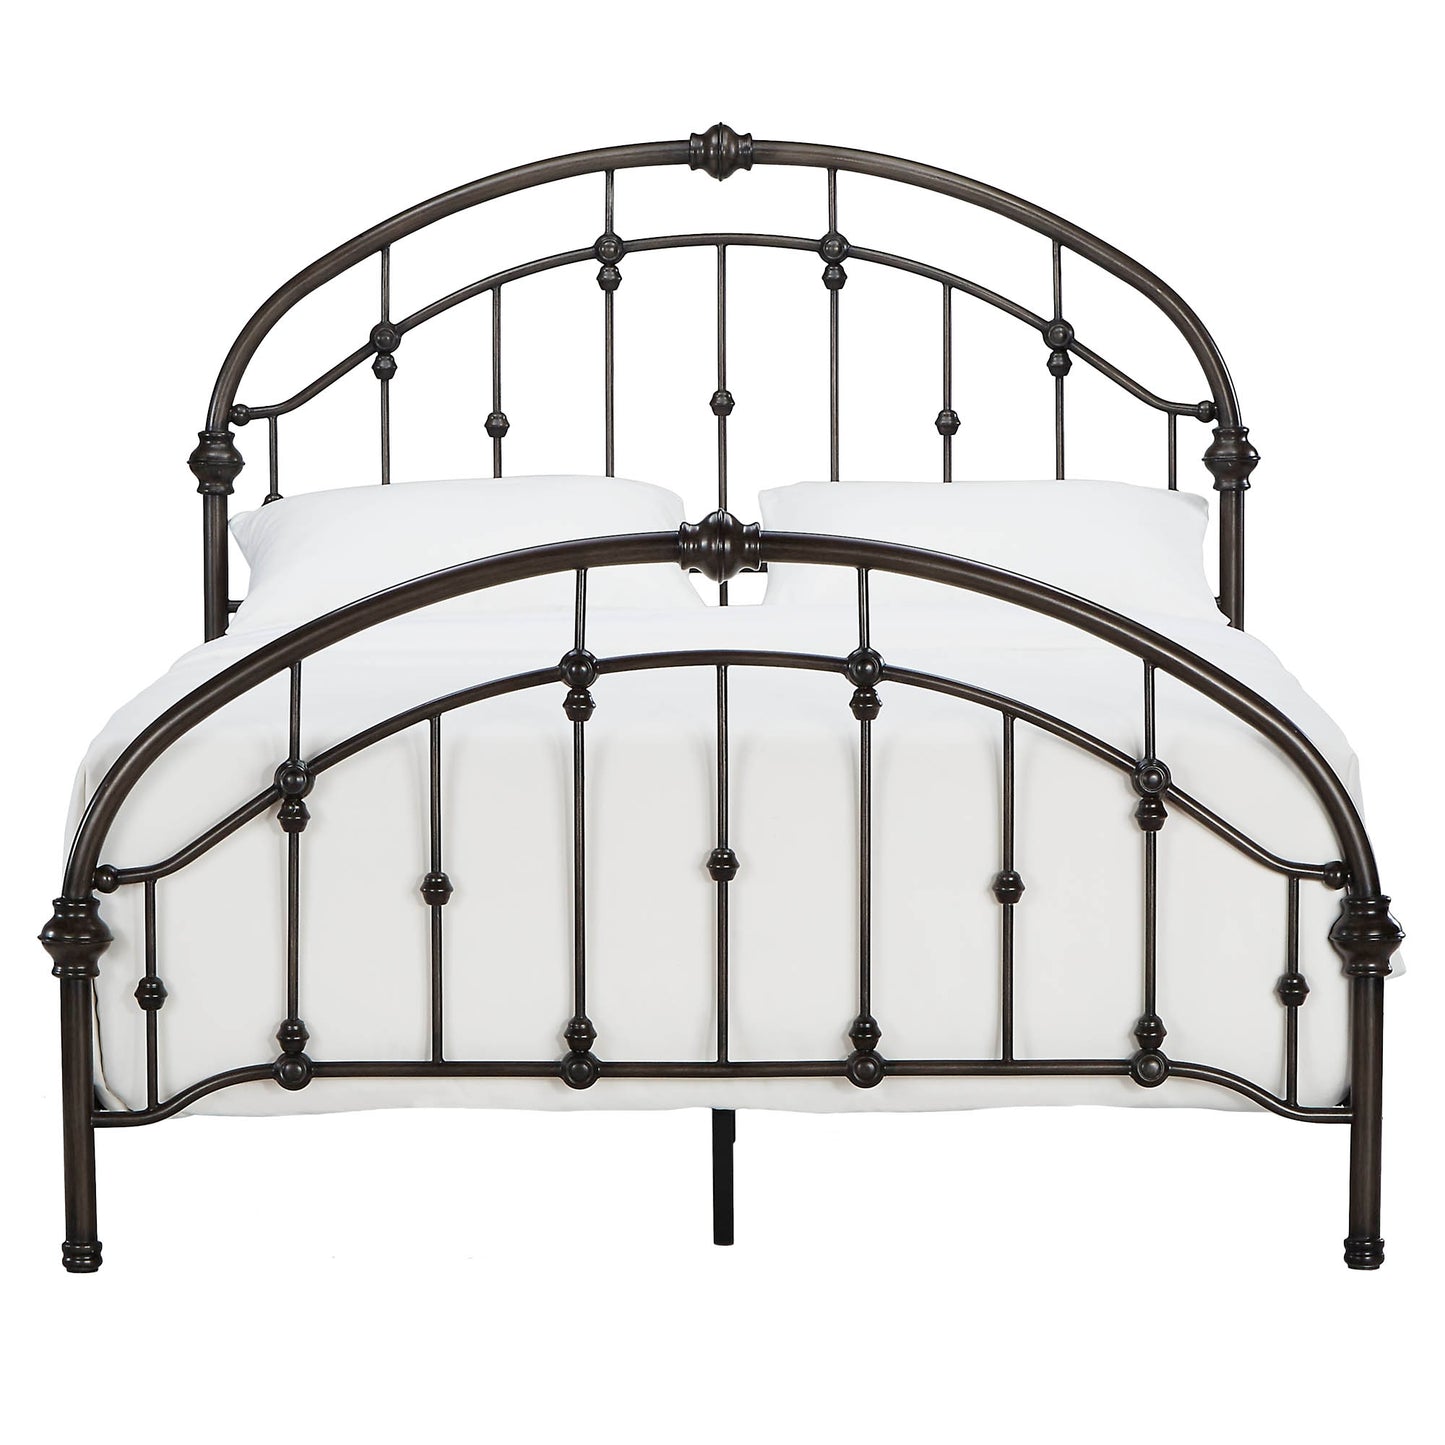 Curved Double Top Arches Victorian Iron Bed - Antique Dark Bronze, Queen Size